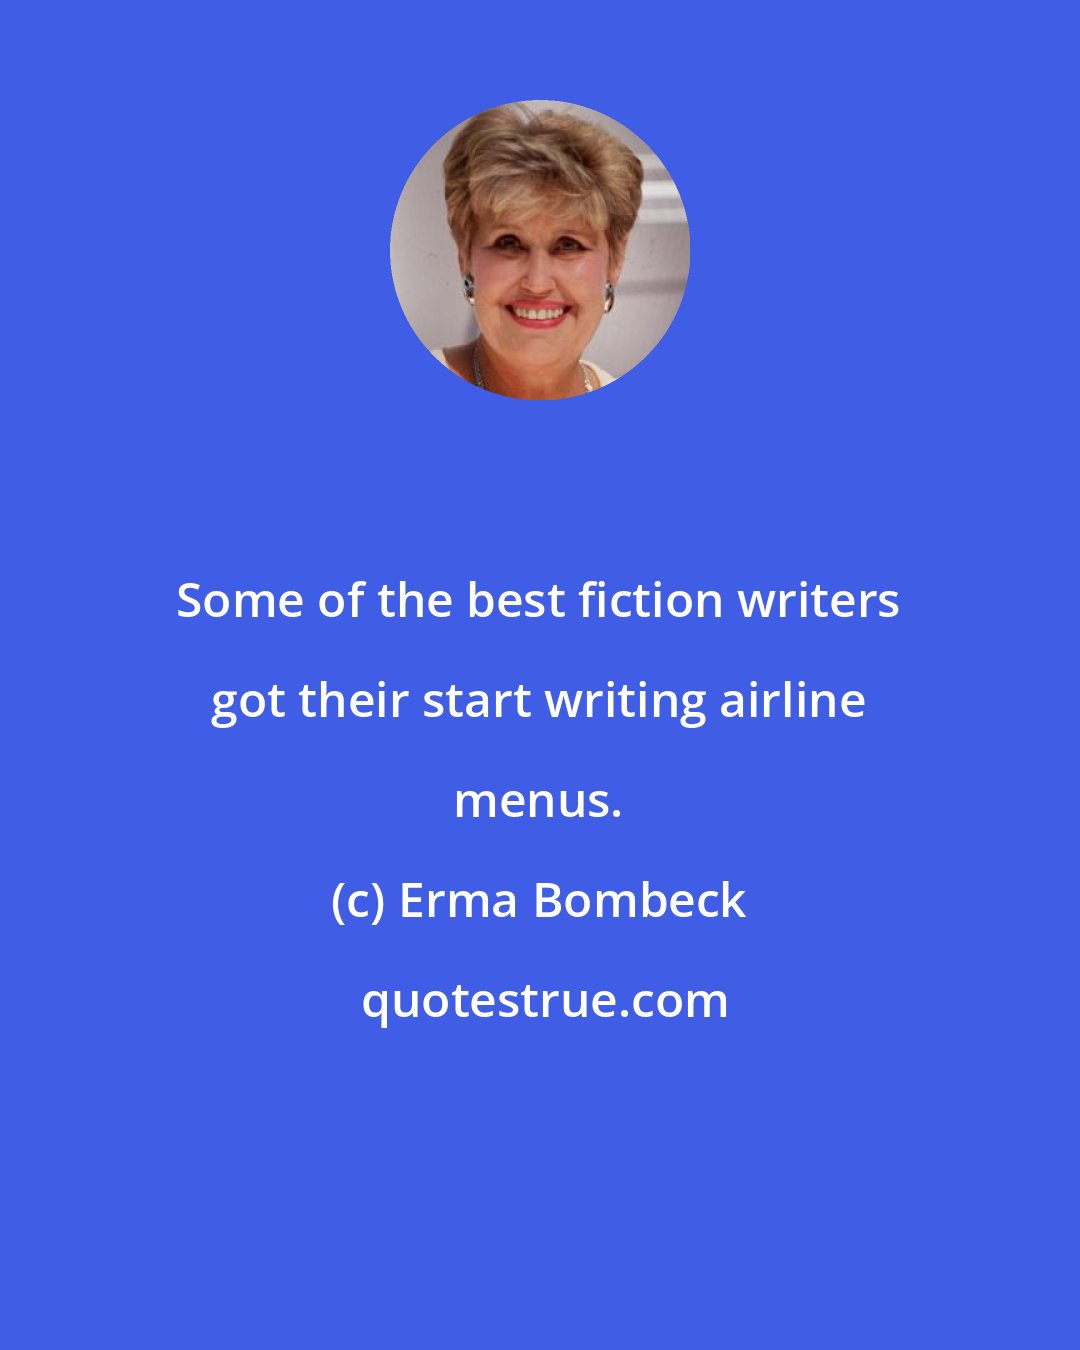 Erma Bombeck: Some of the best fiction writers got their start writing airline menus.